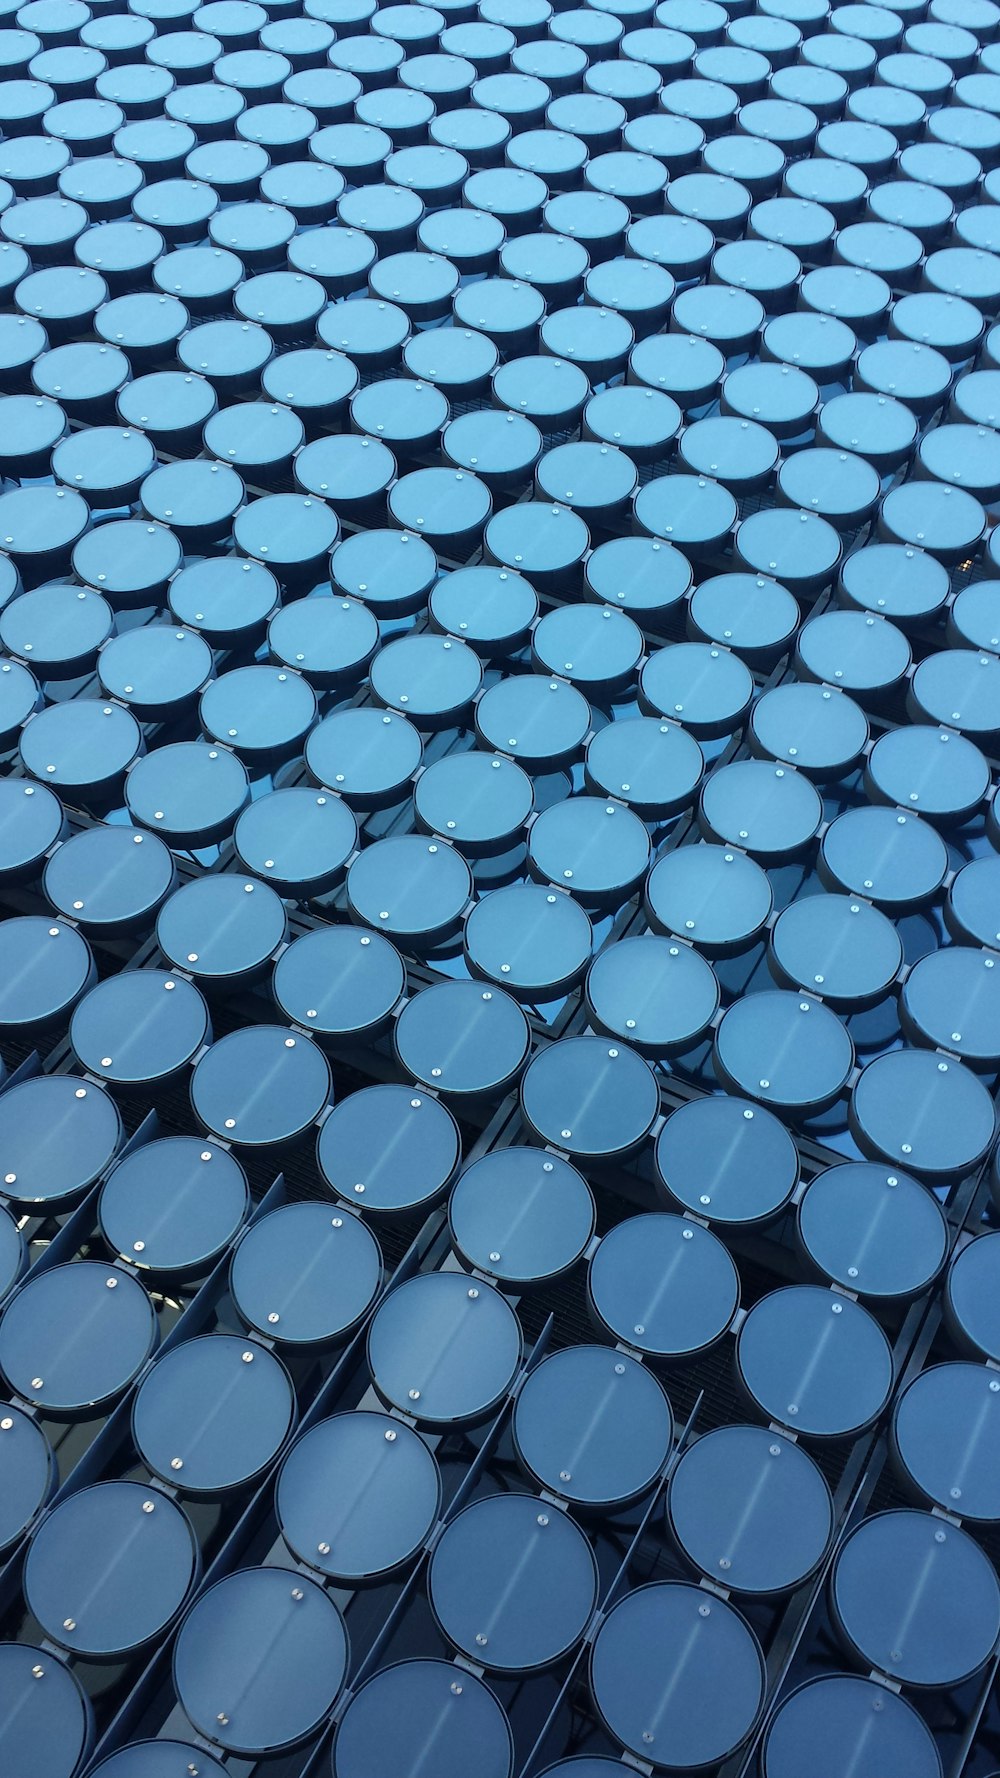 a close up view of a building made of blue barrels